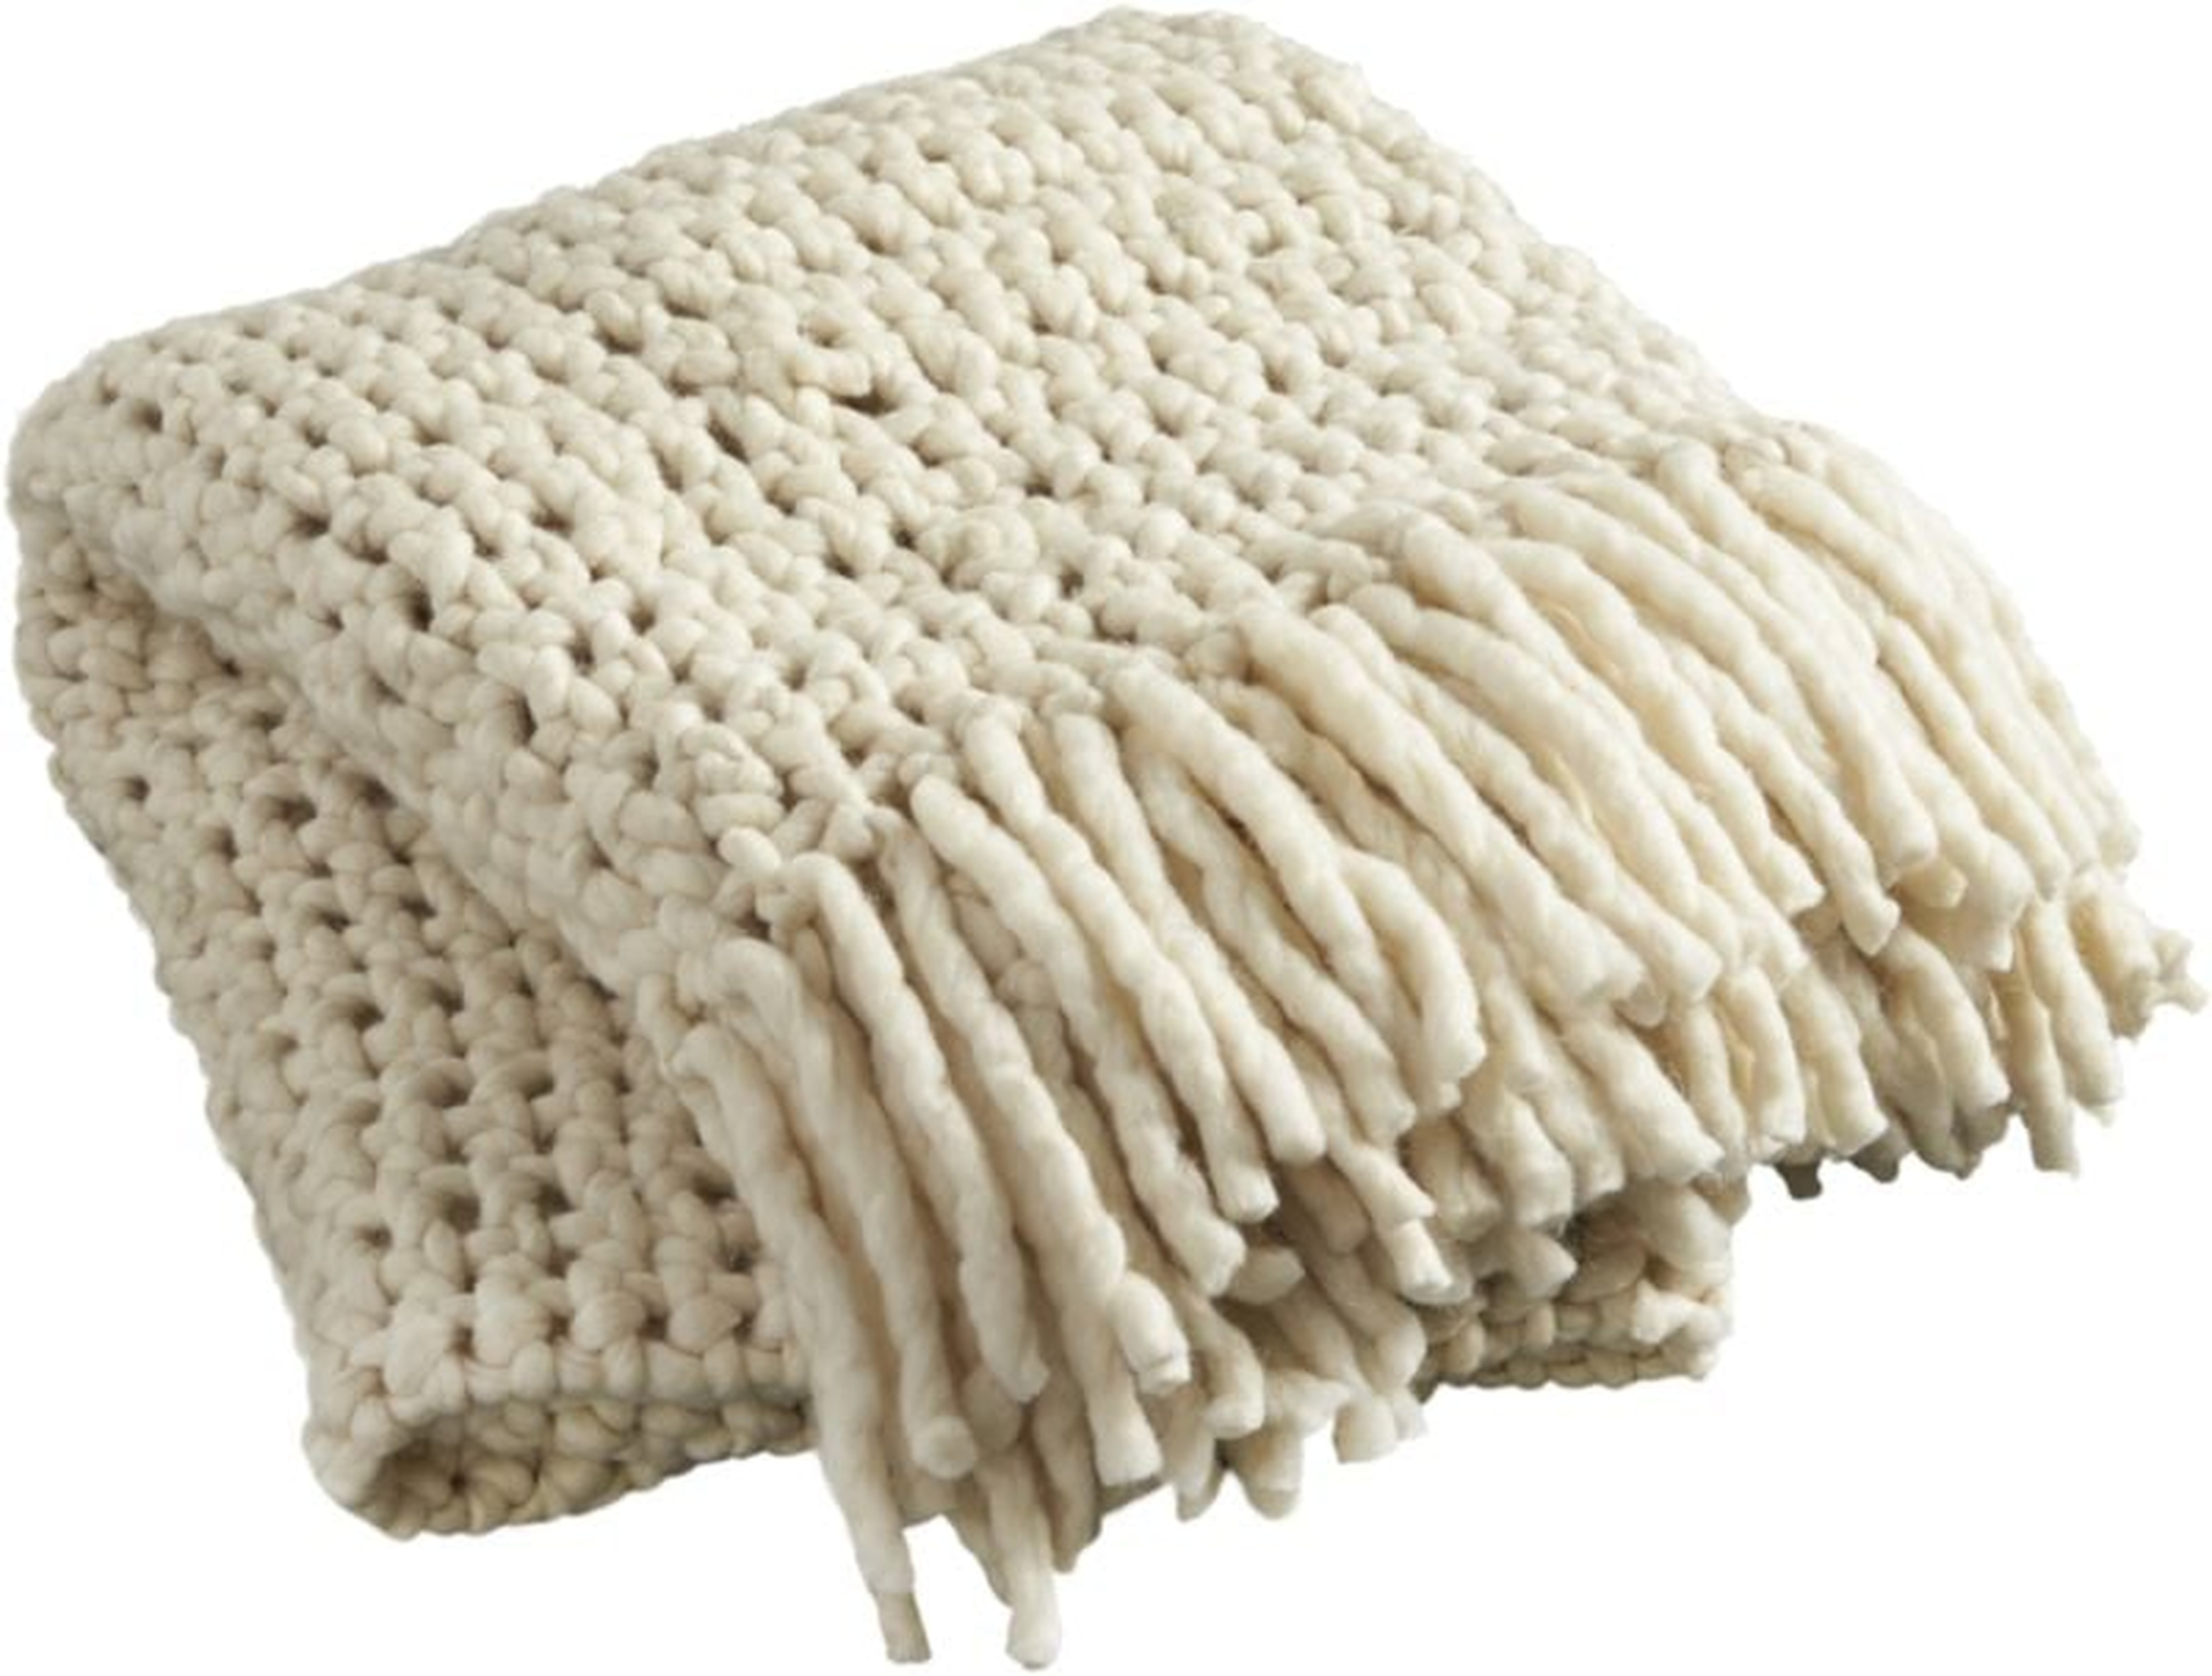 Overlook White Chunky Knit Throw Blanket - CB2